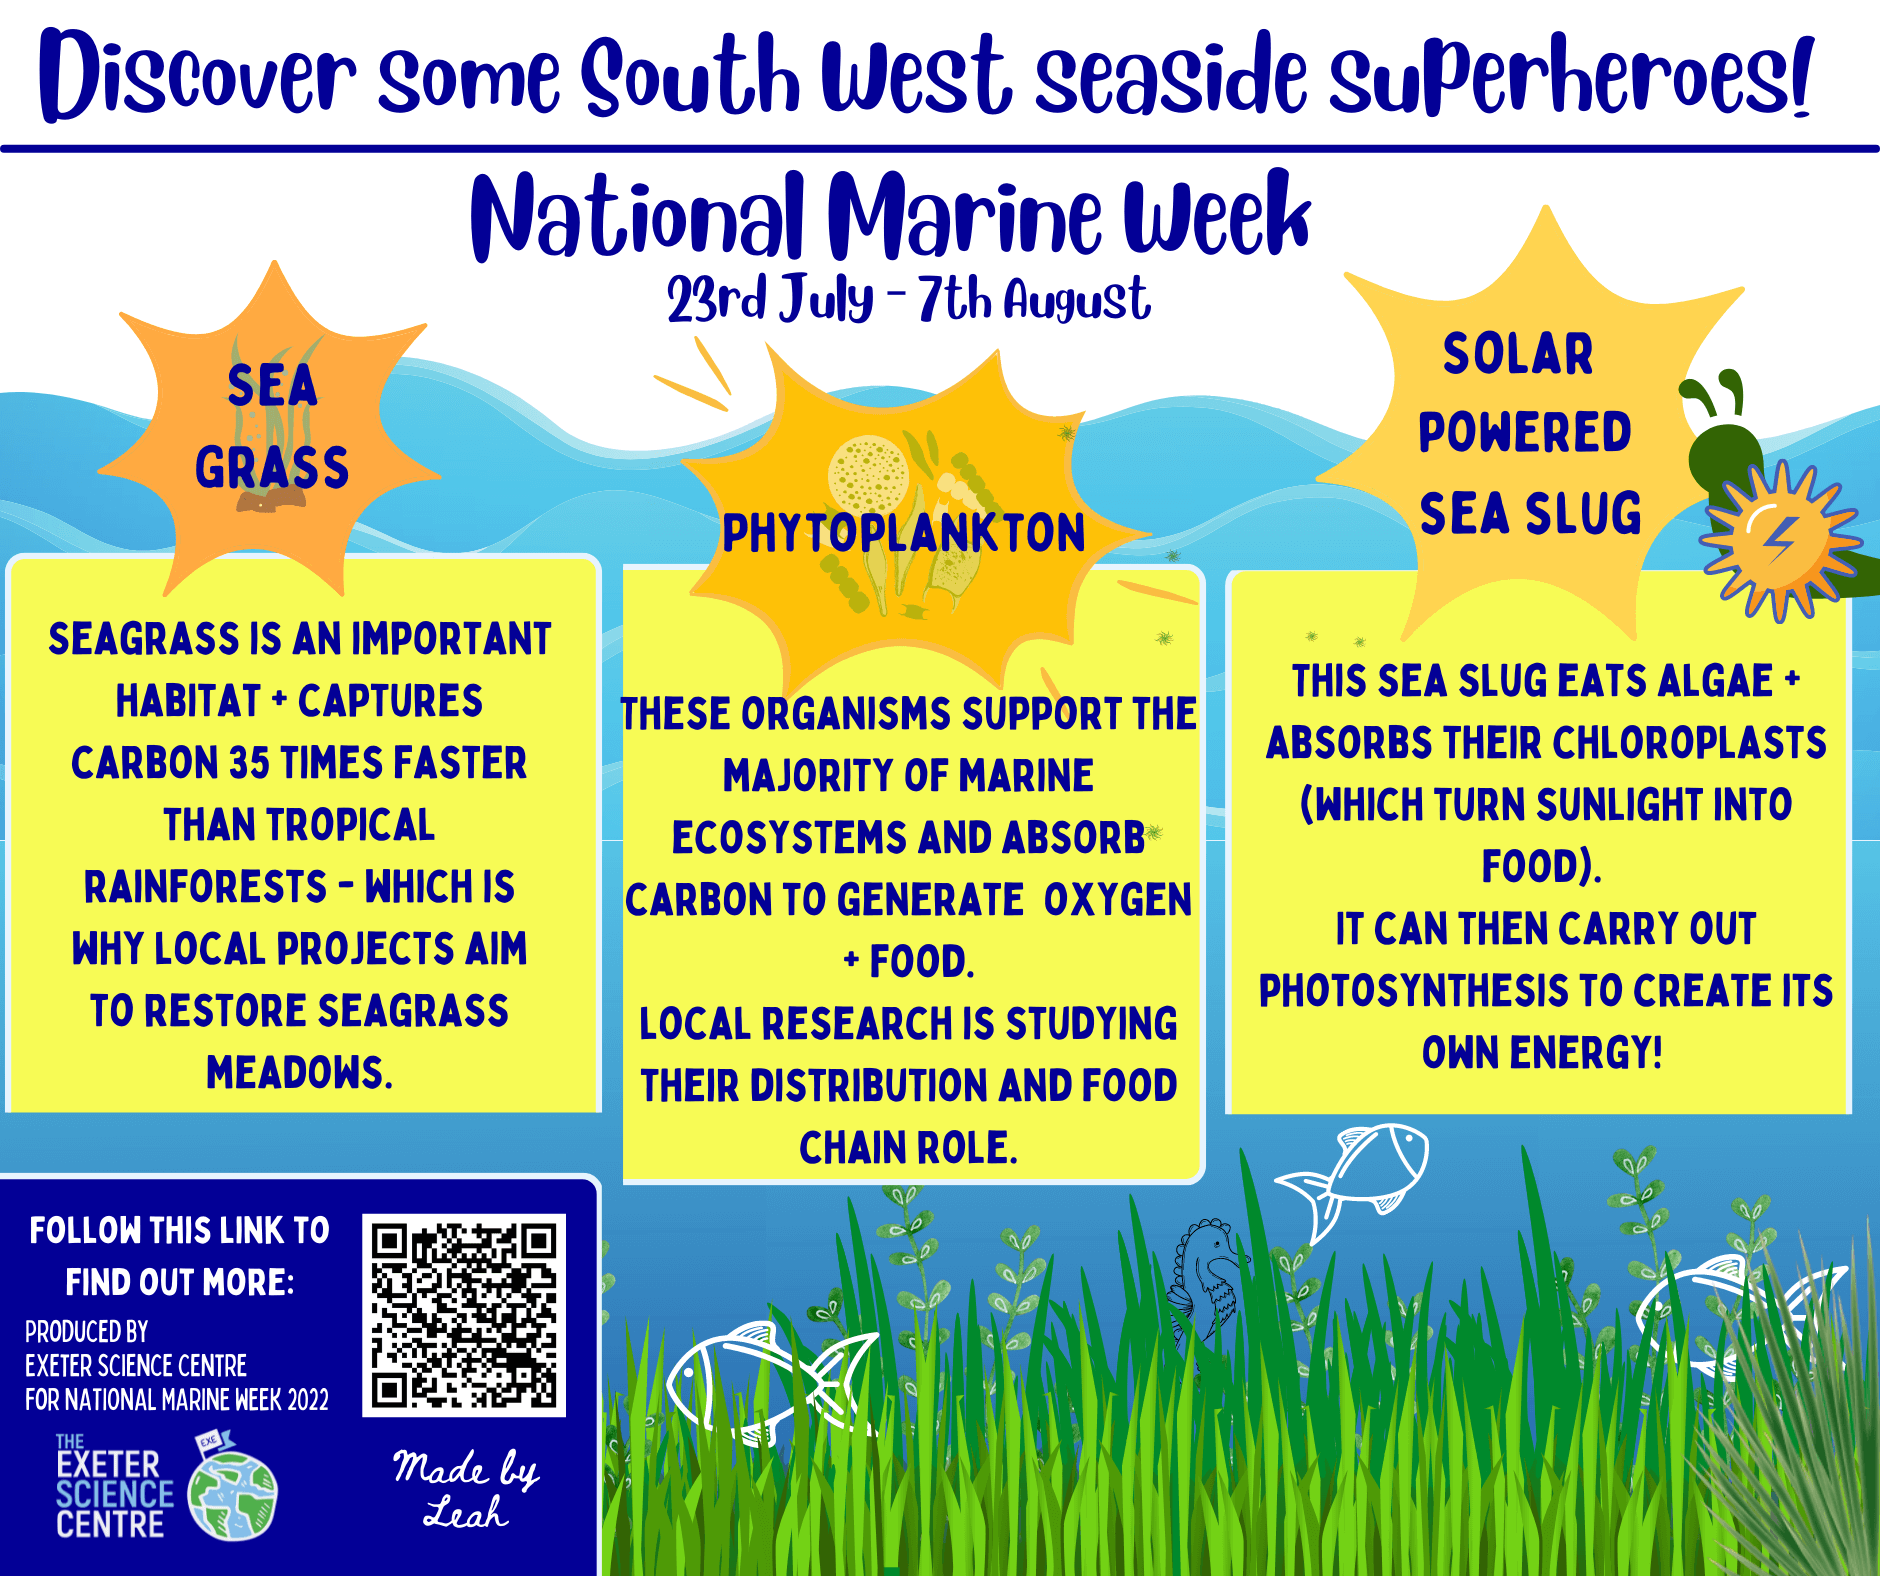 This vibrant infographic celebrates "South West Seaside Superheroes" for National Marine Week, from July 23rd to August 7th. It highlights three key marine organisms: Seagrass, Phytoplankton, and a solar-powered Sea Slug.